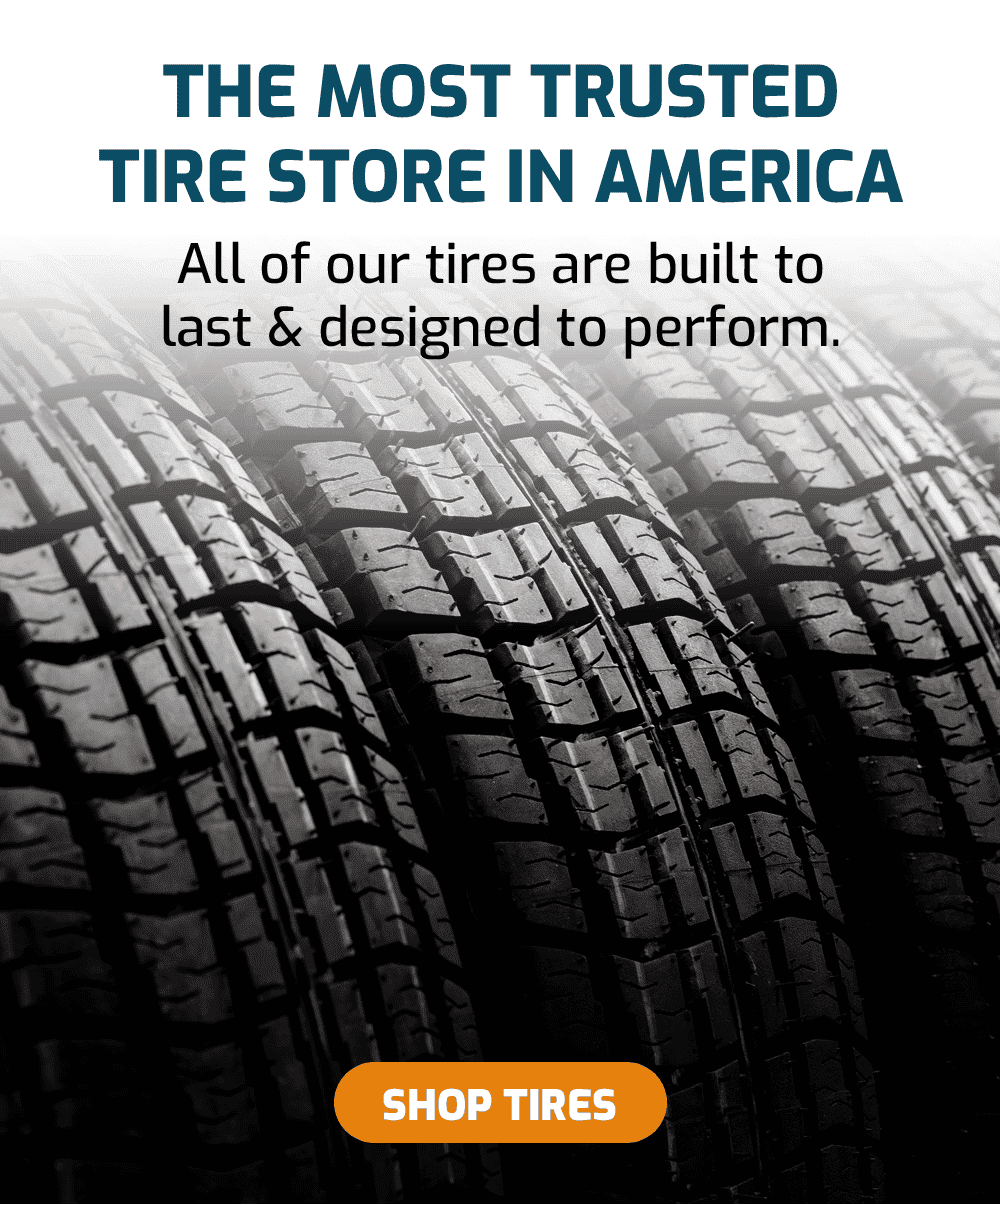 The most trusted tire store